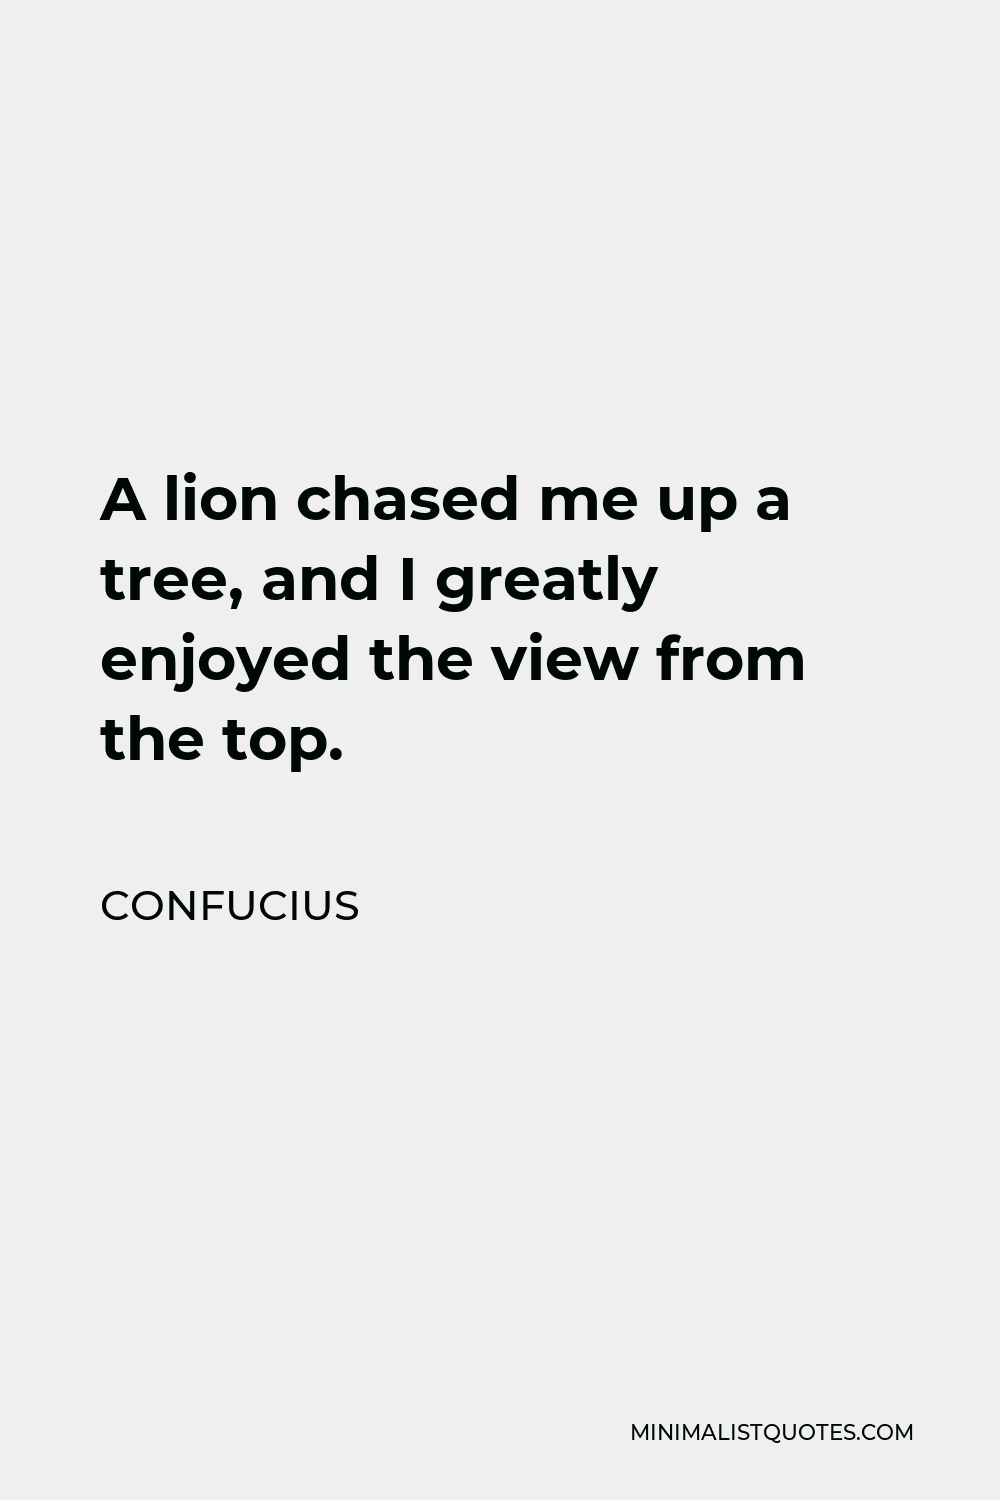 Confucius Quote - A lion chased me up a tree, and I greatly enjoyed the view from the top.